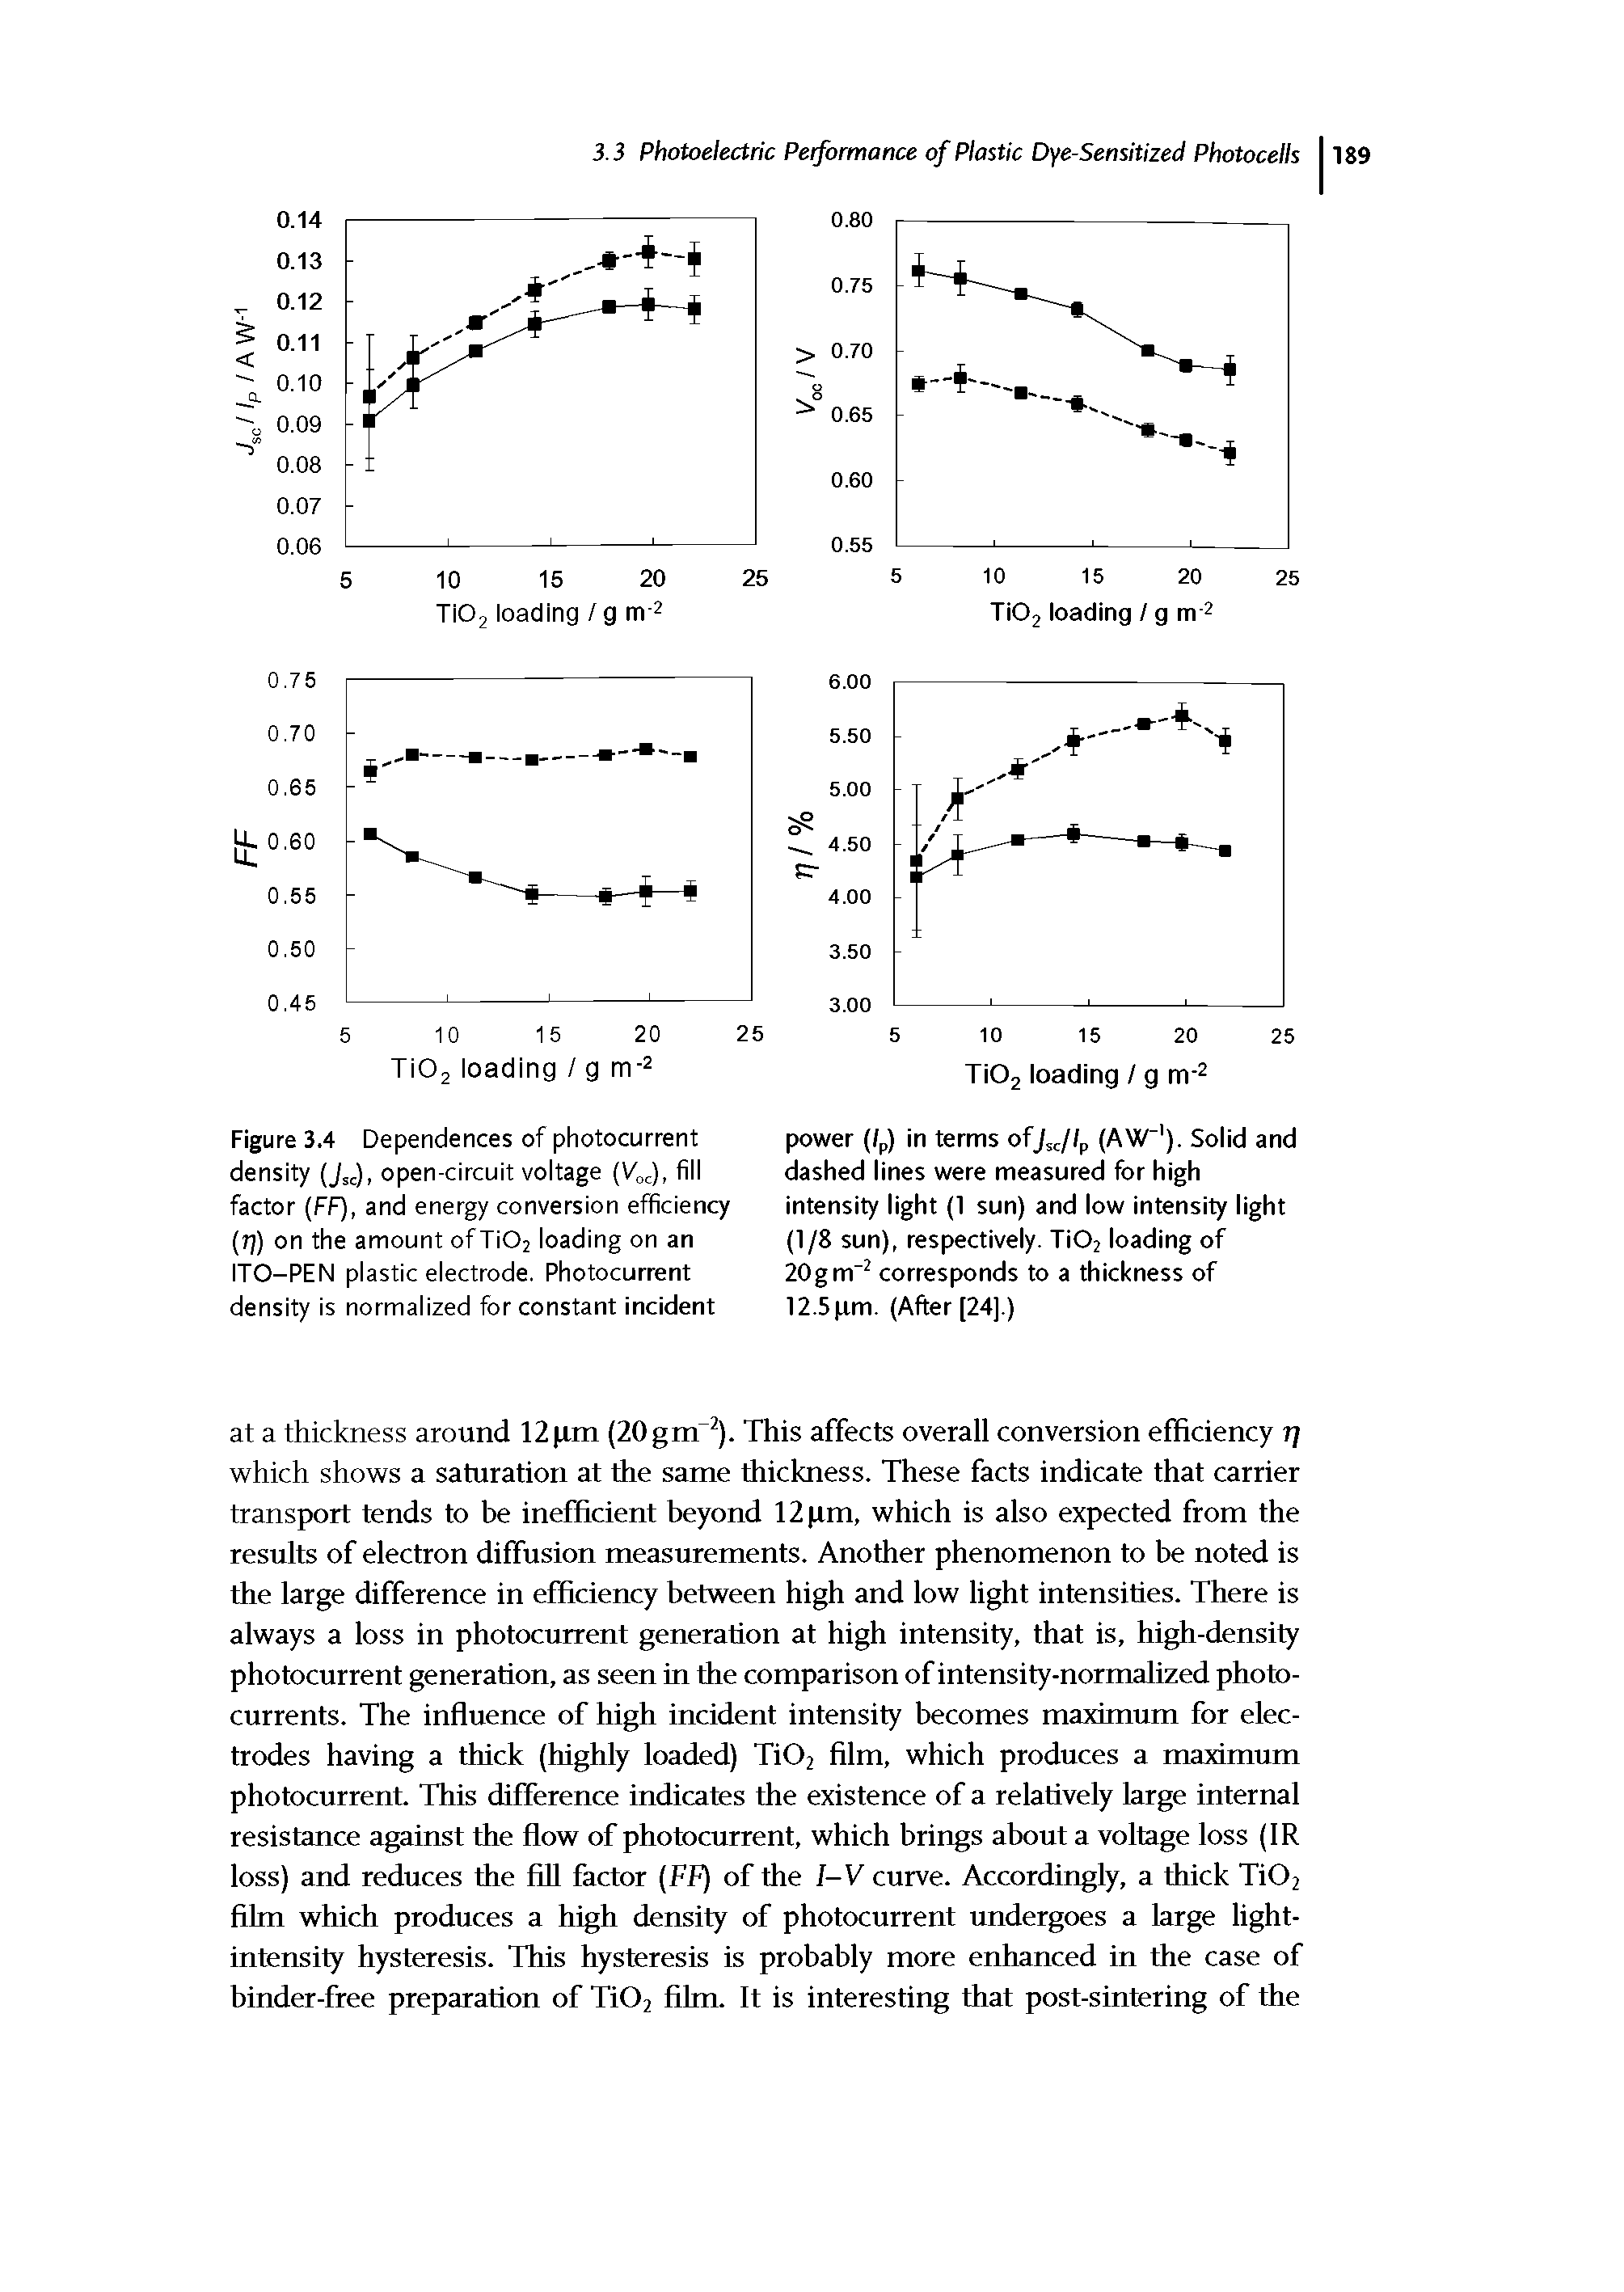 Figure 3.4 Dependences of photocurrent density (J J, open-circuit voltage (Voc). fill factor (FF), and energy conversion efficiency ri) on the amount of Ti02 loading on an ITO-PEN plastic electrode. Photocurrent density is normalized for constant incident...